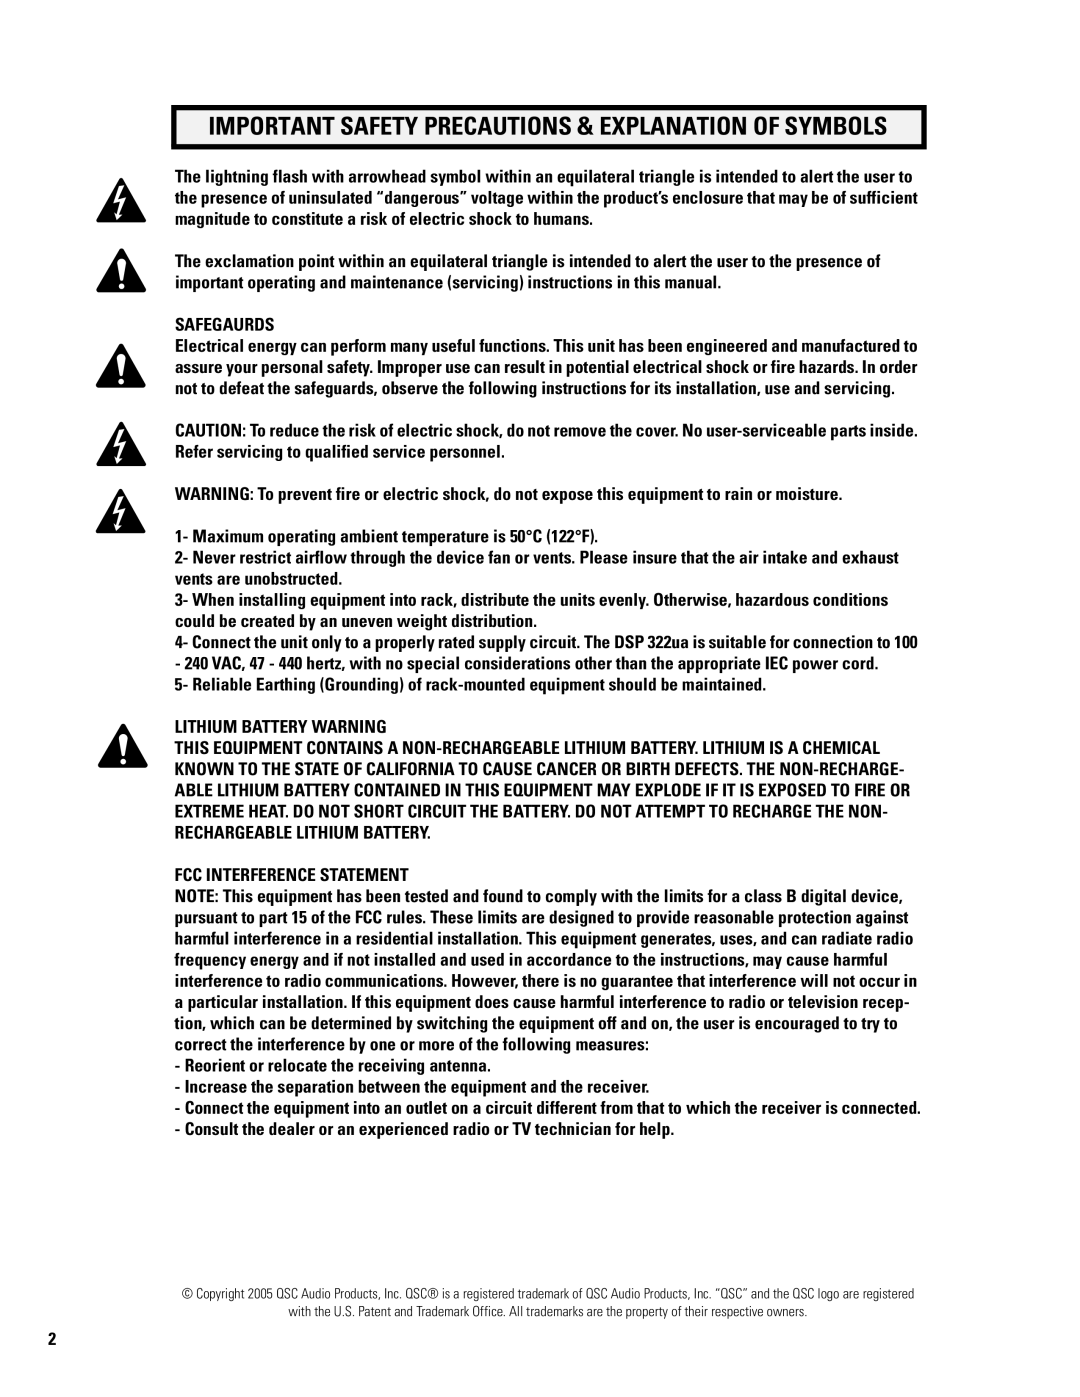 QSC Audio DSP 322UA manual Safegaurds, Lithium Battery Warning, Fcc Interference Statement 